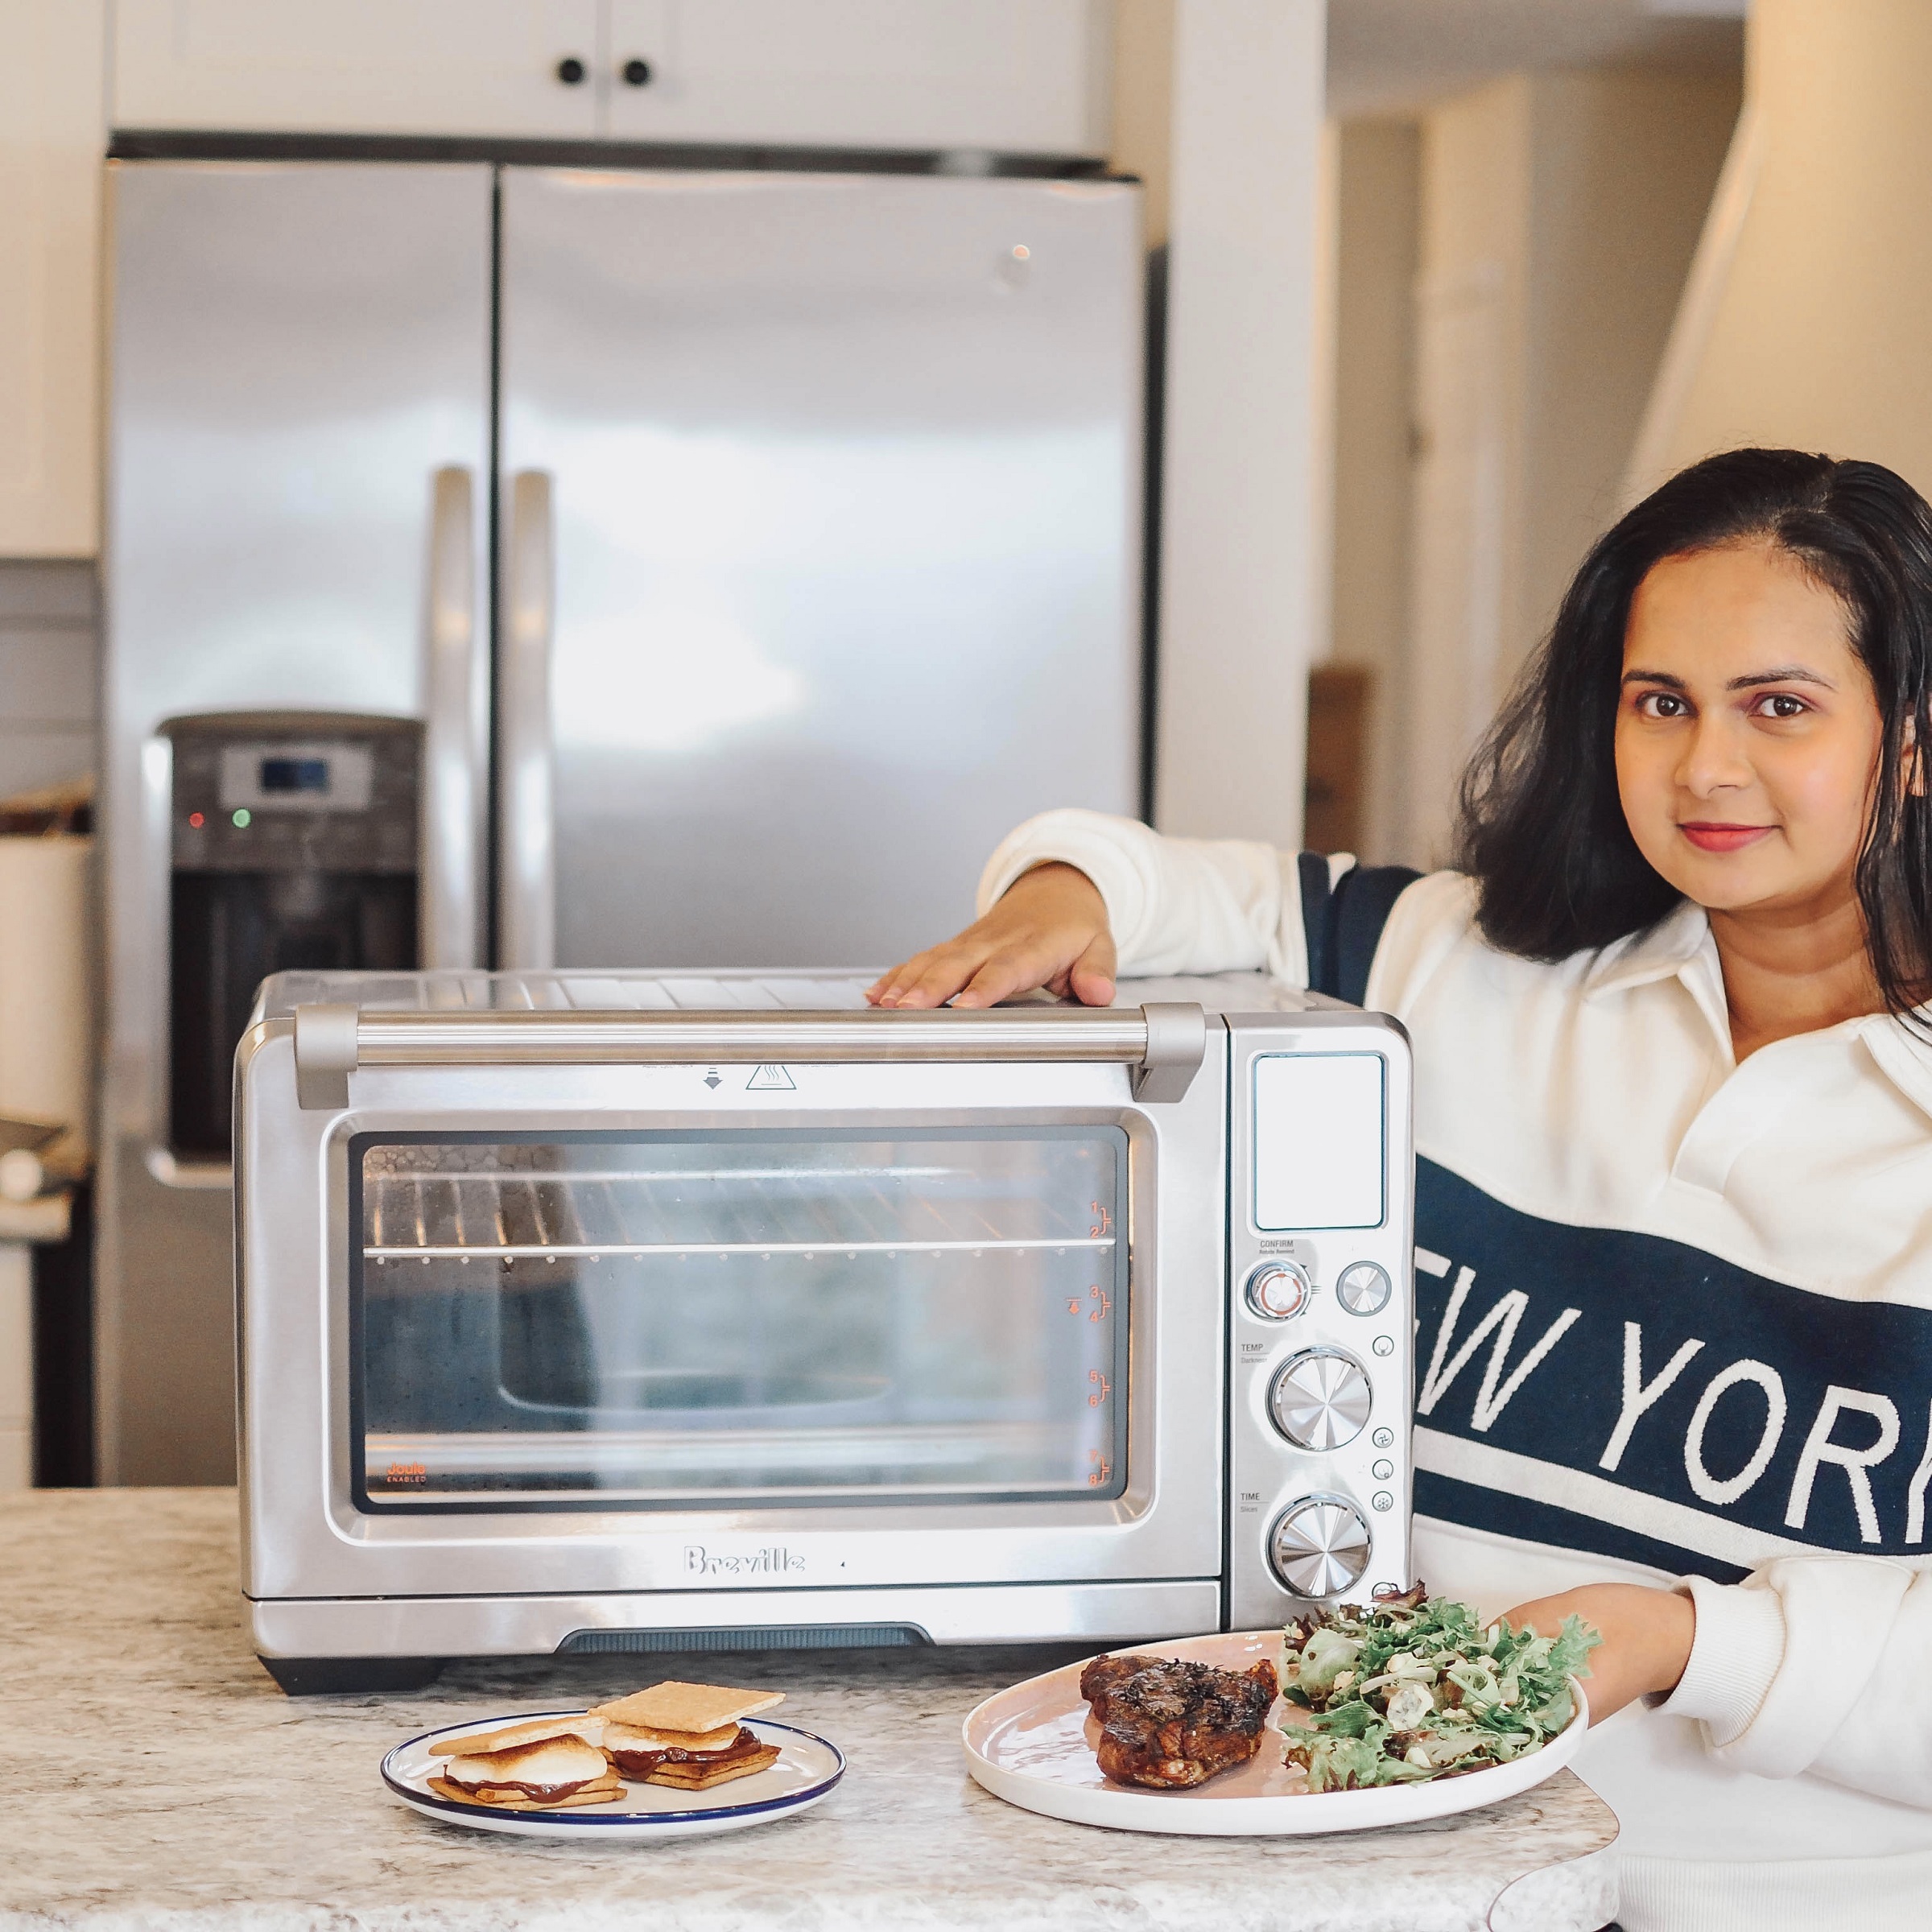 Hassle-free cooking with Breville Joule Oven Air Fryer Pro - thatneongirl